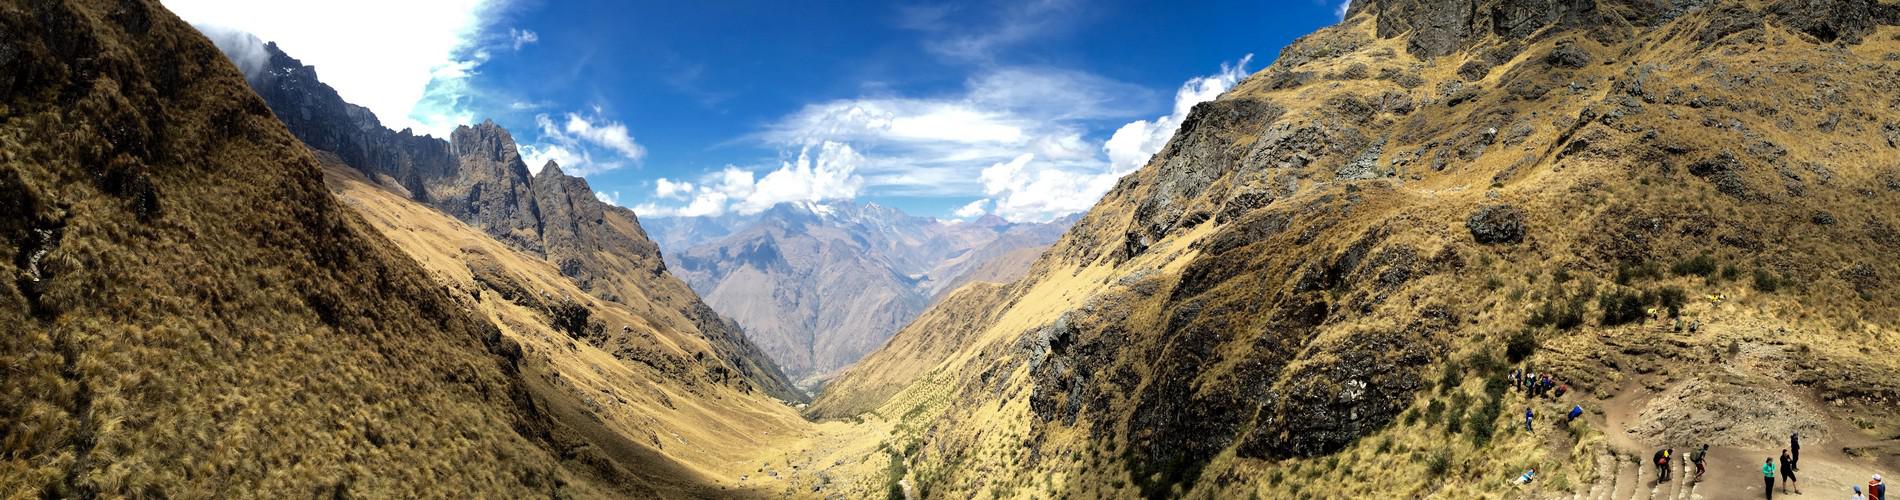 The Classic 4 day Inca Trail